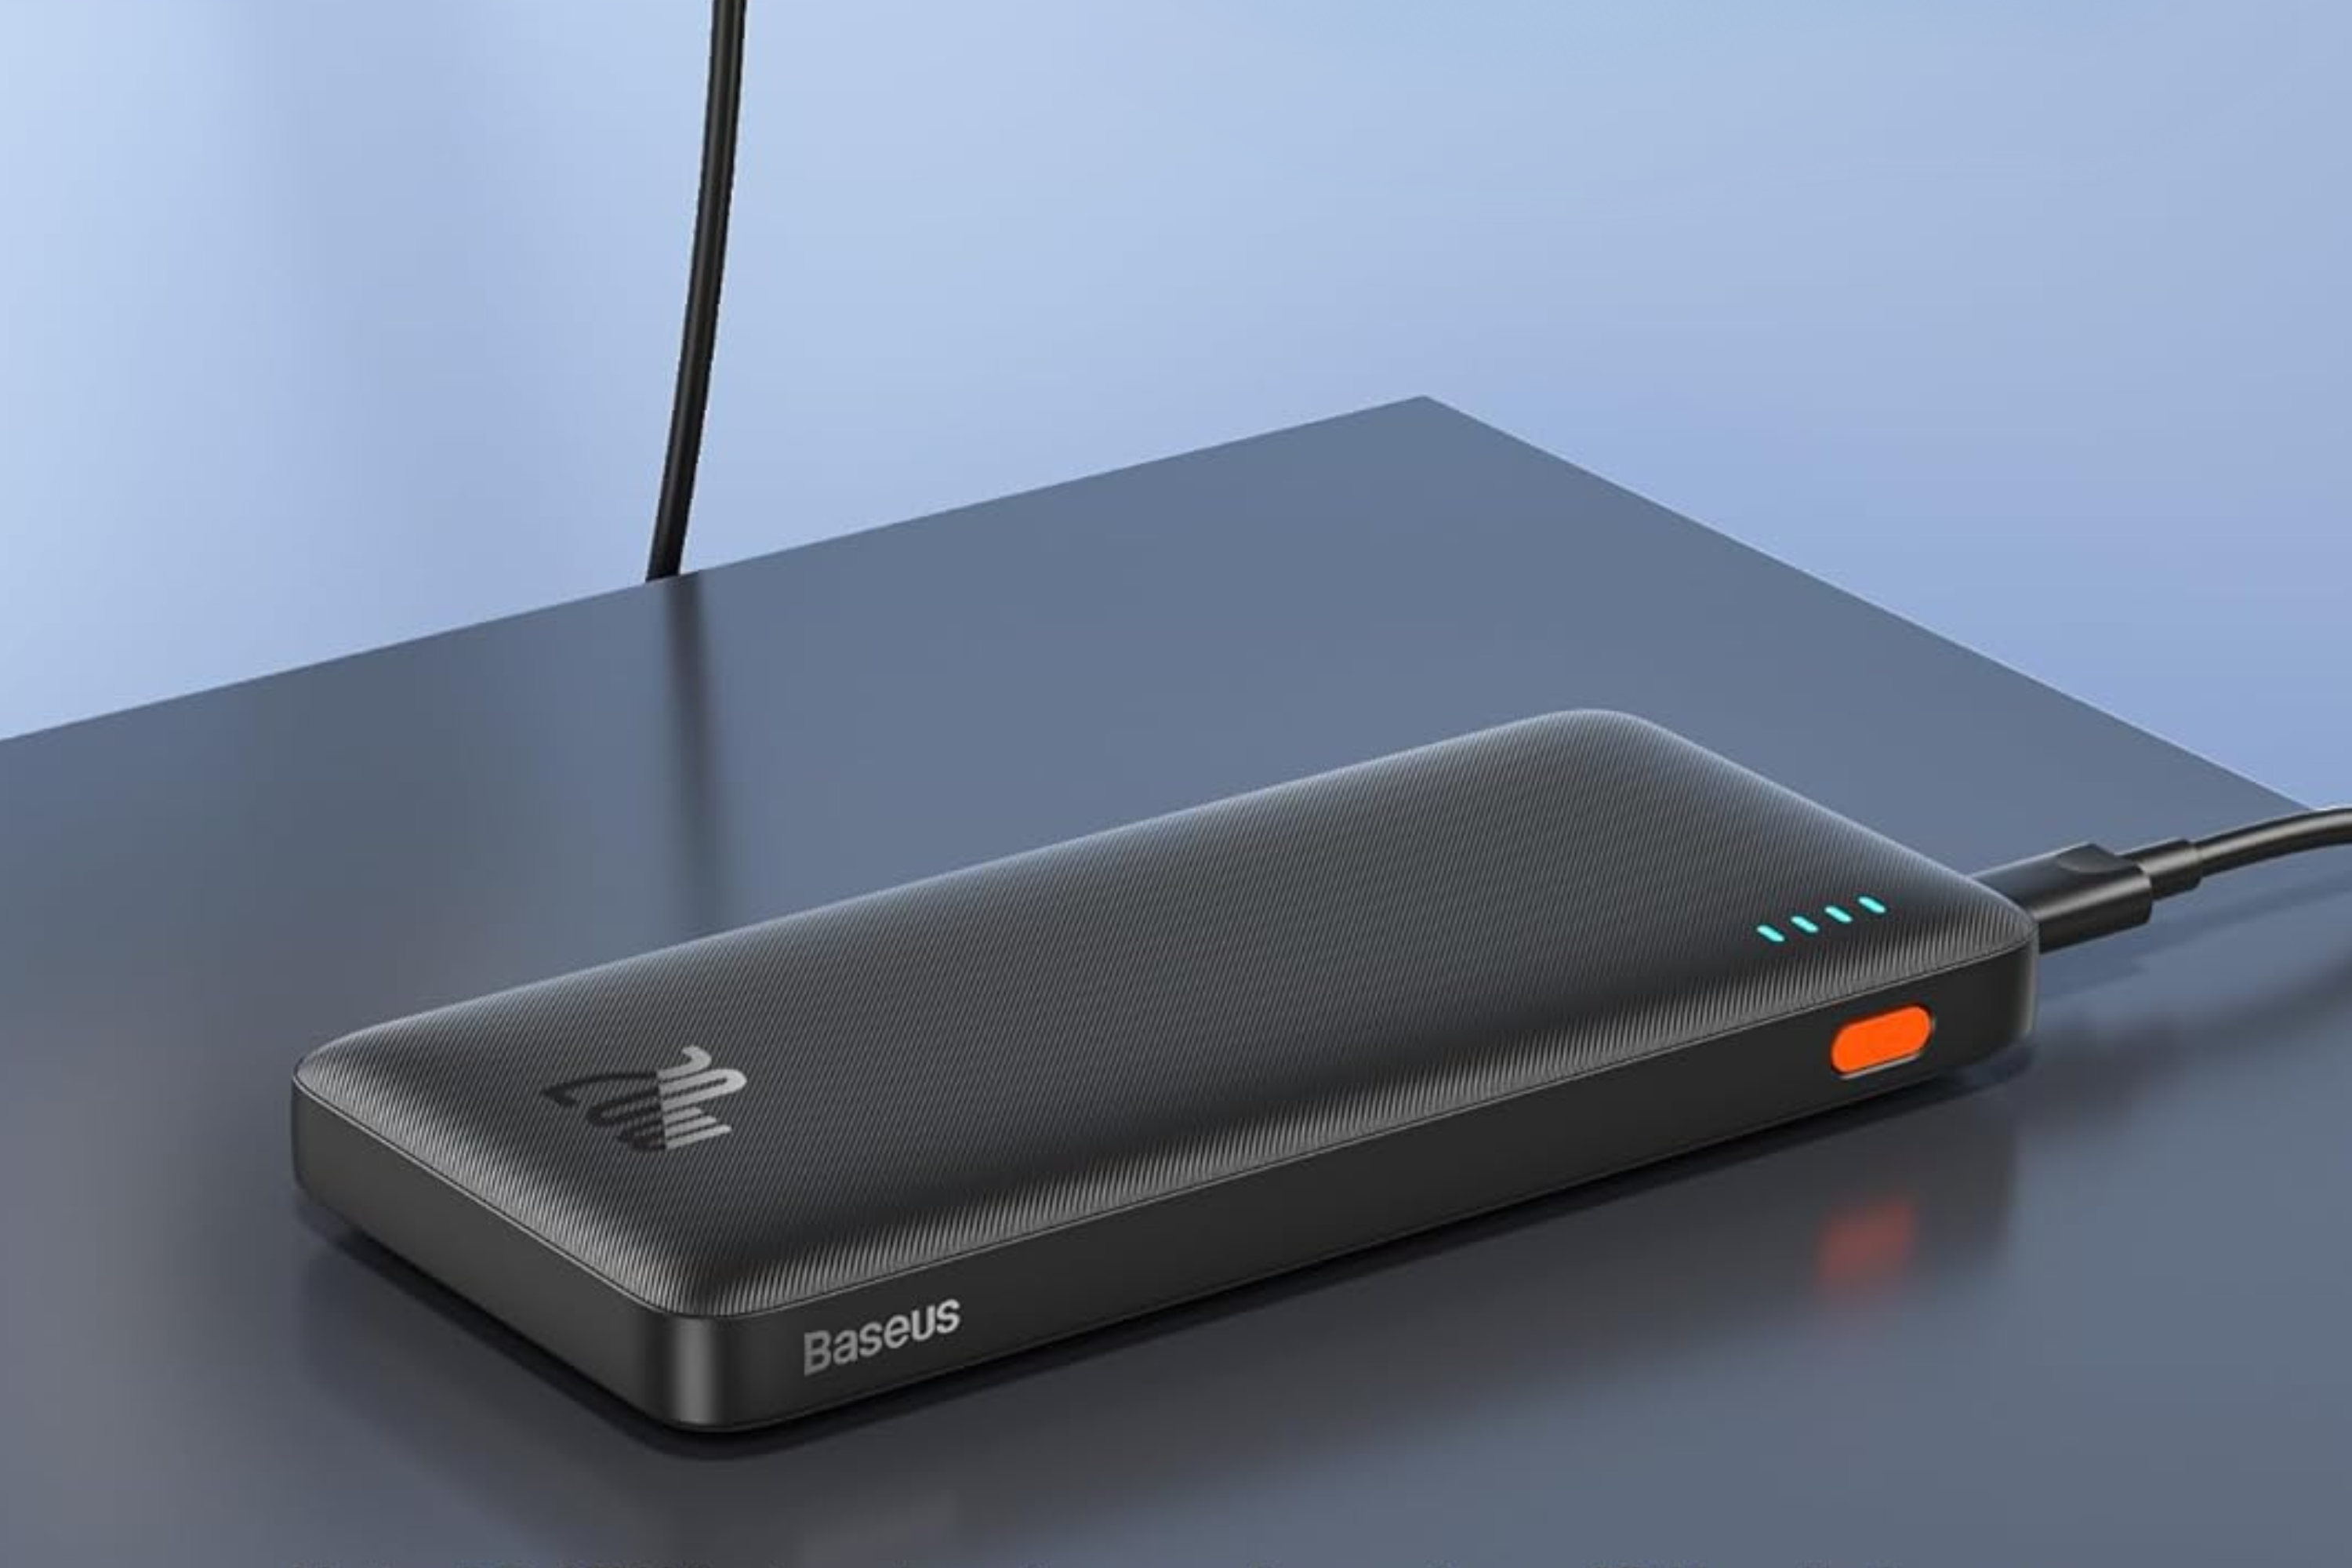 Baseus PD 20W 10000mAh Slim Battery Pack plugged in and charging on a table 